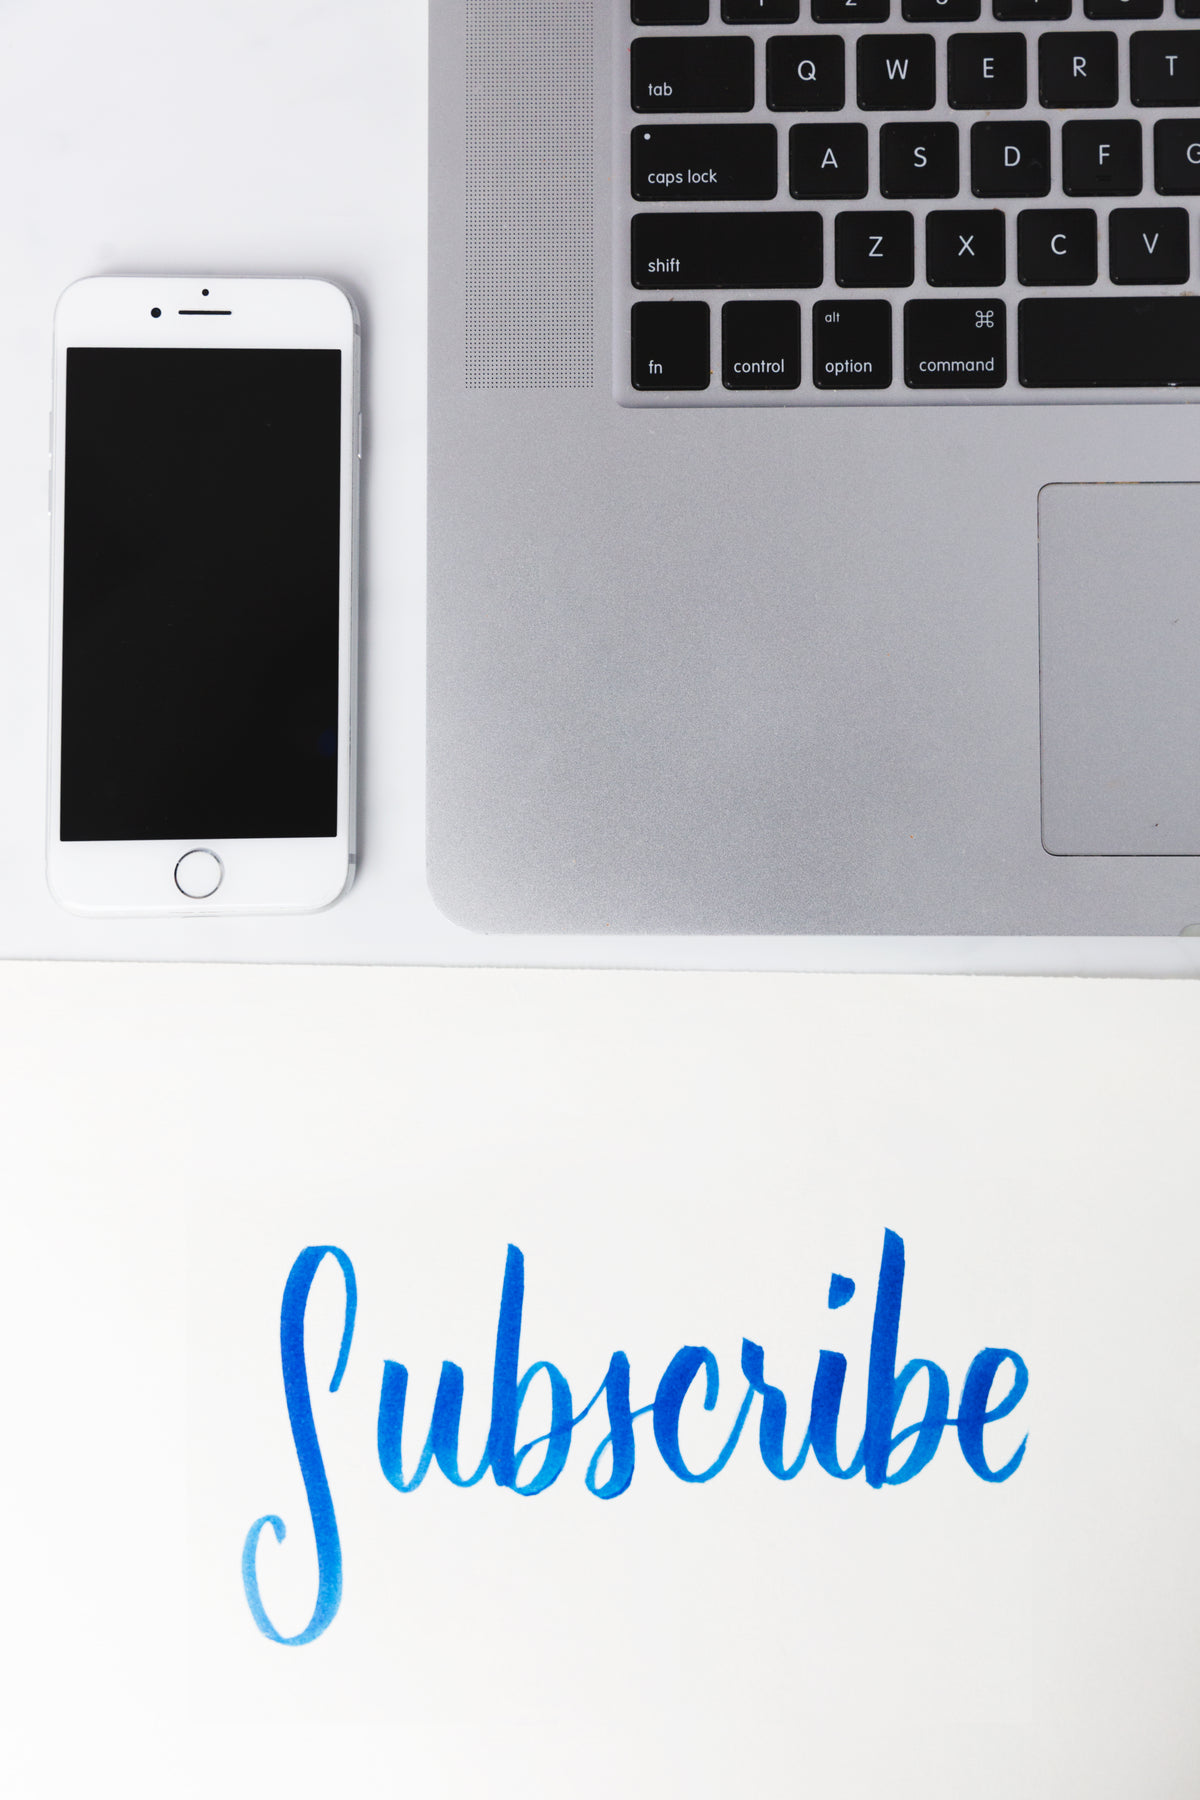 subscribe written under a phone and laptop